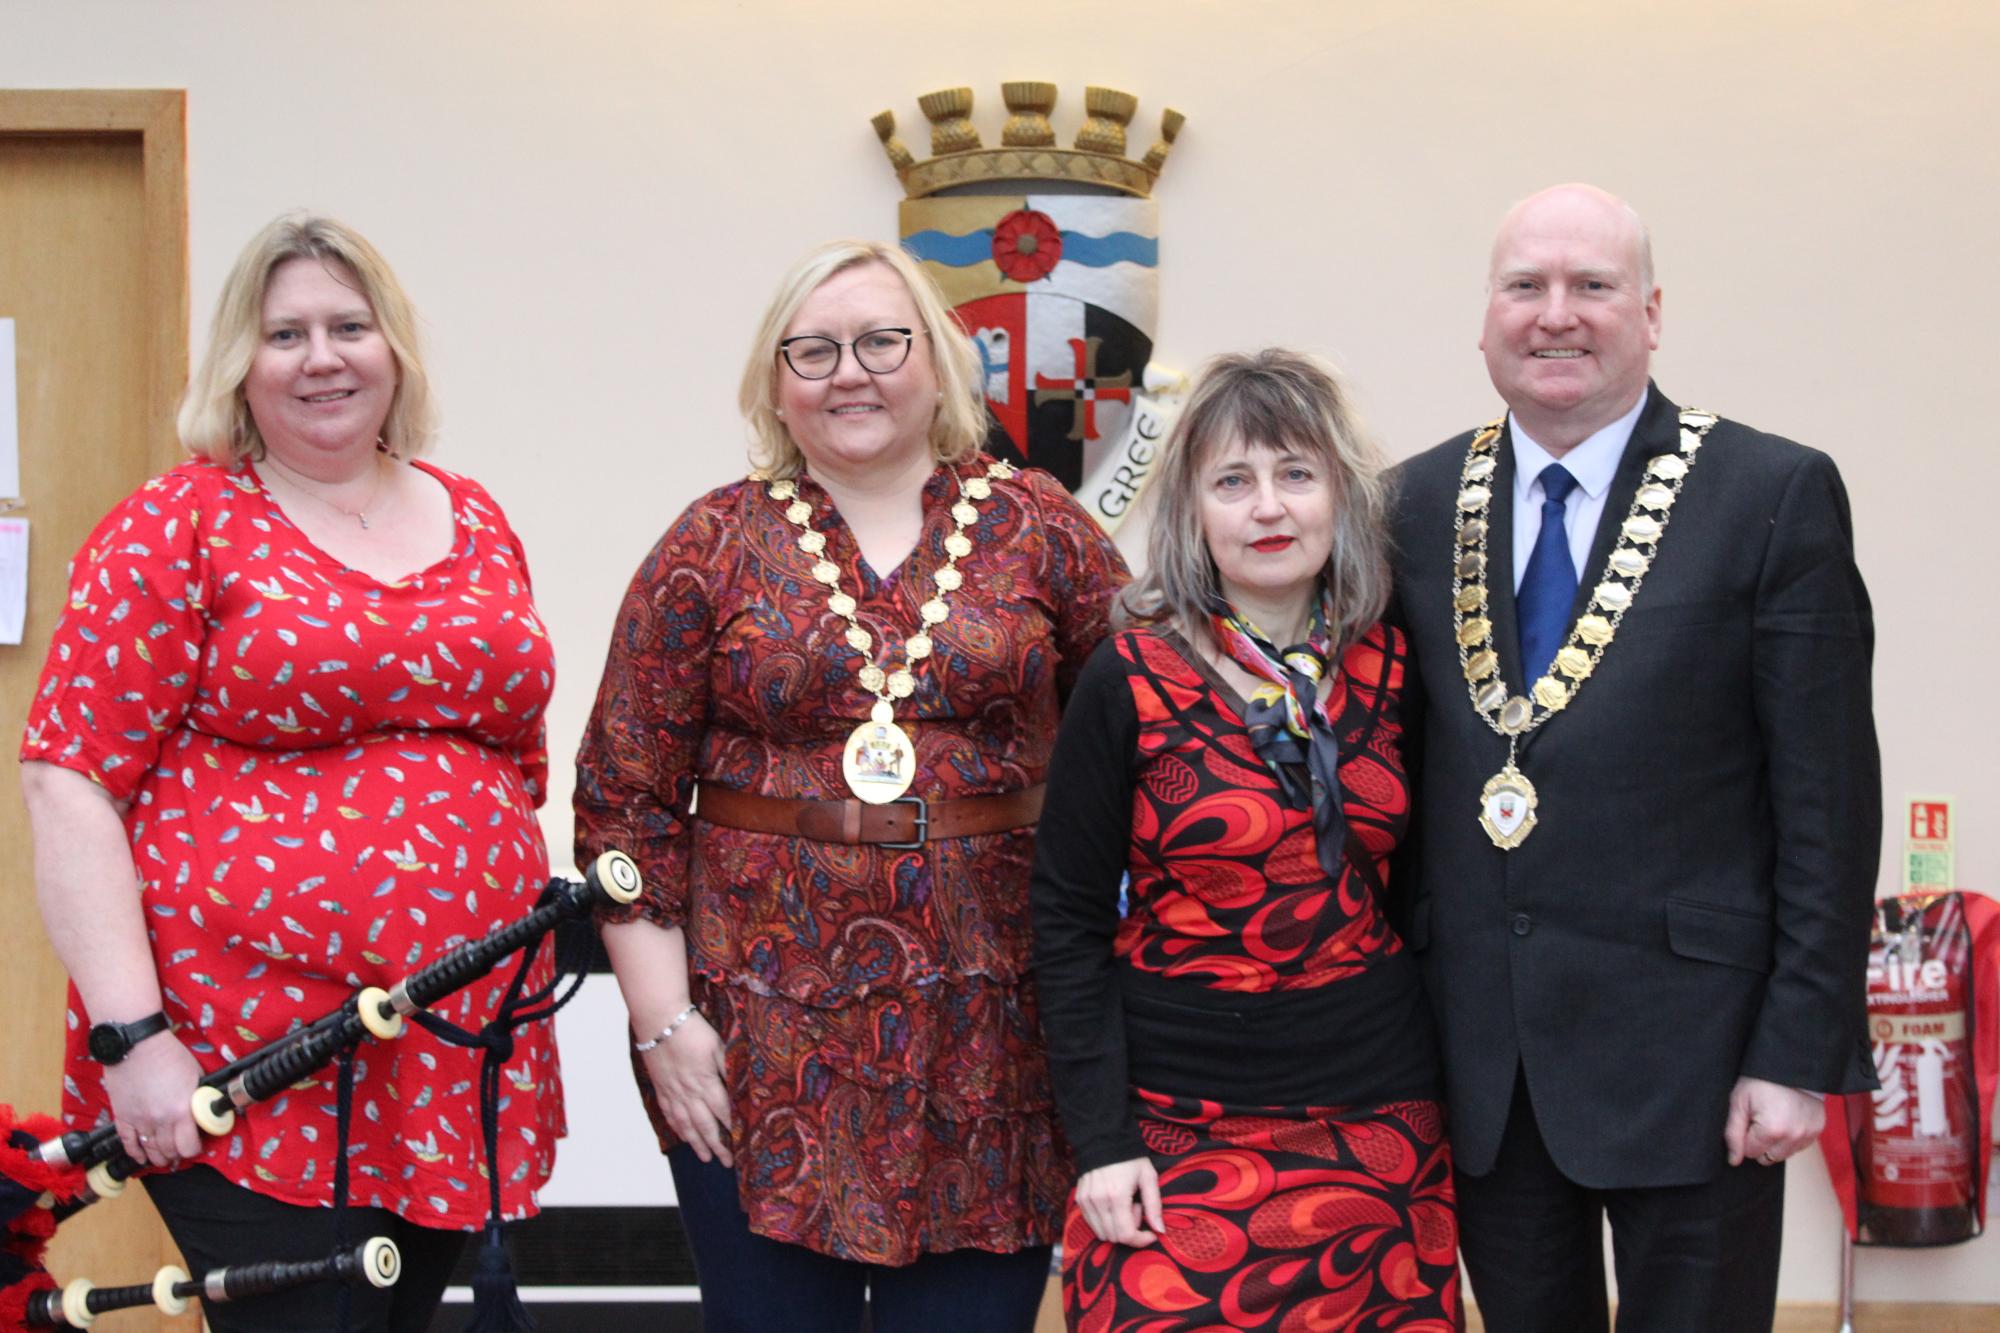 Official opening of exhibition with artist Karen Strang, East Dunbartonshire Provost Gillian Renwick and Clackmannanshire Provost Donald Balsillie 